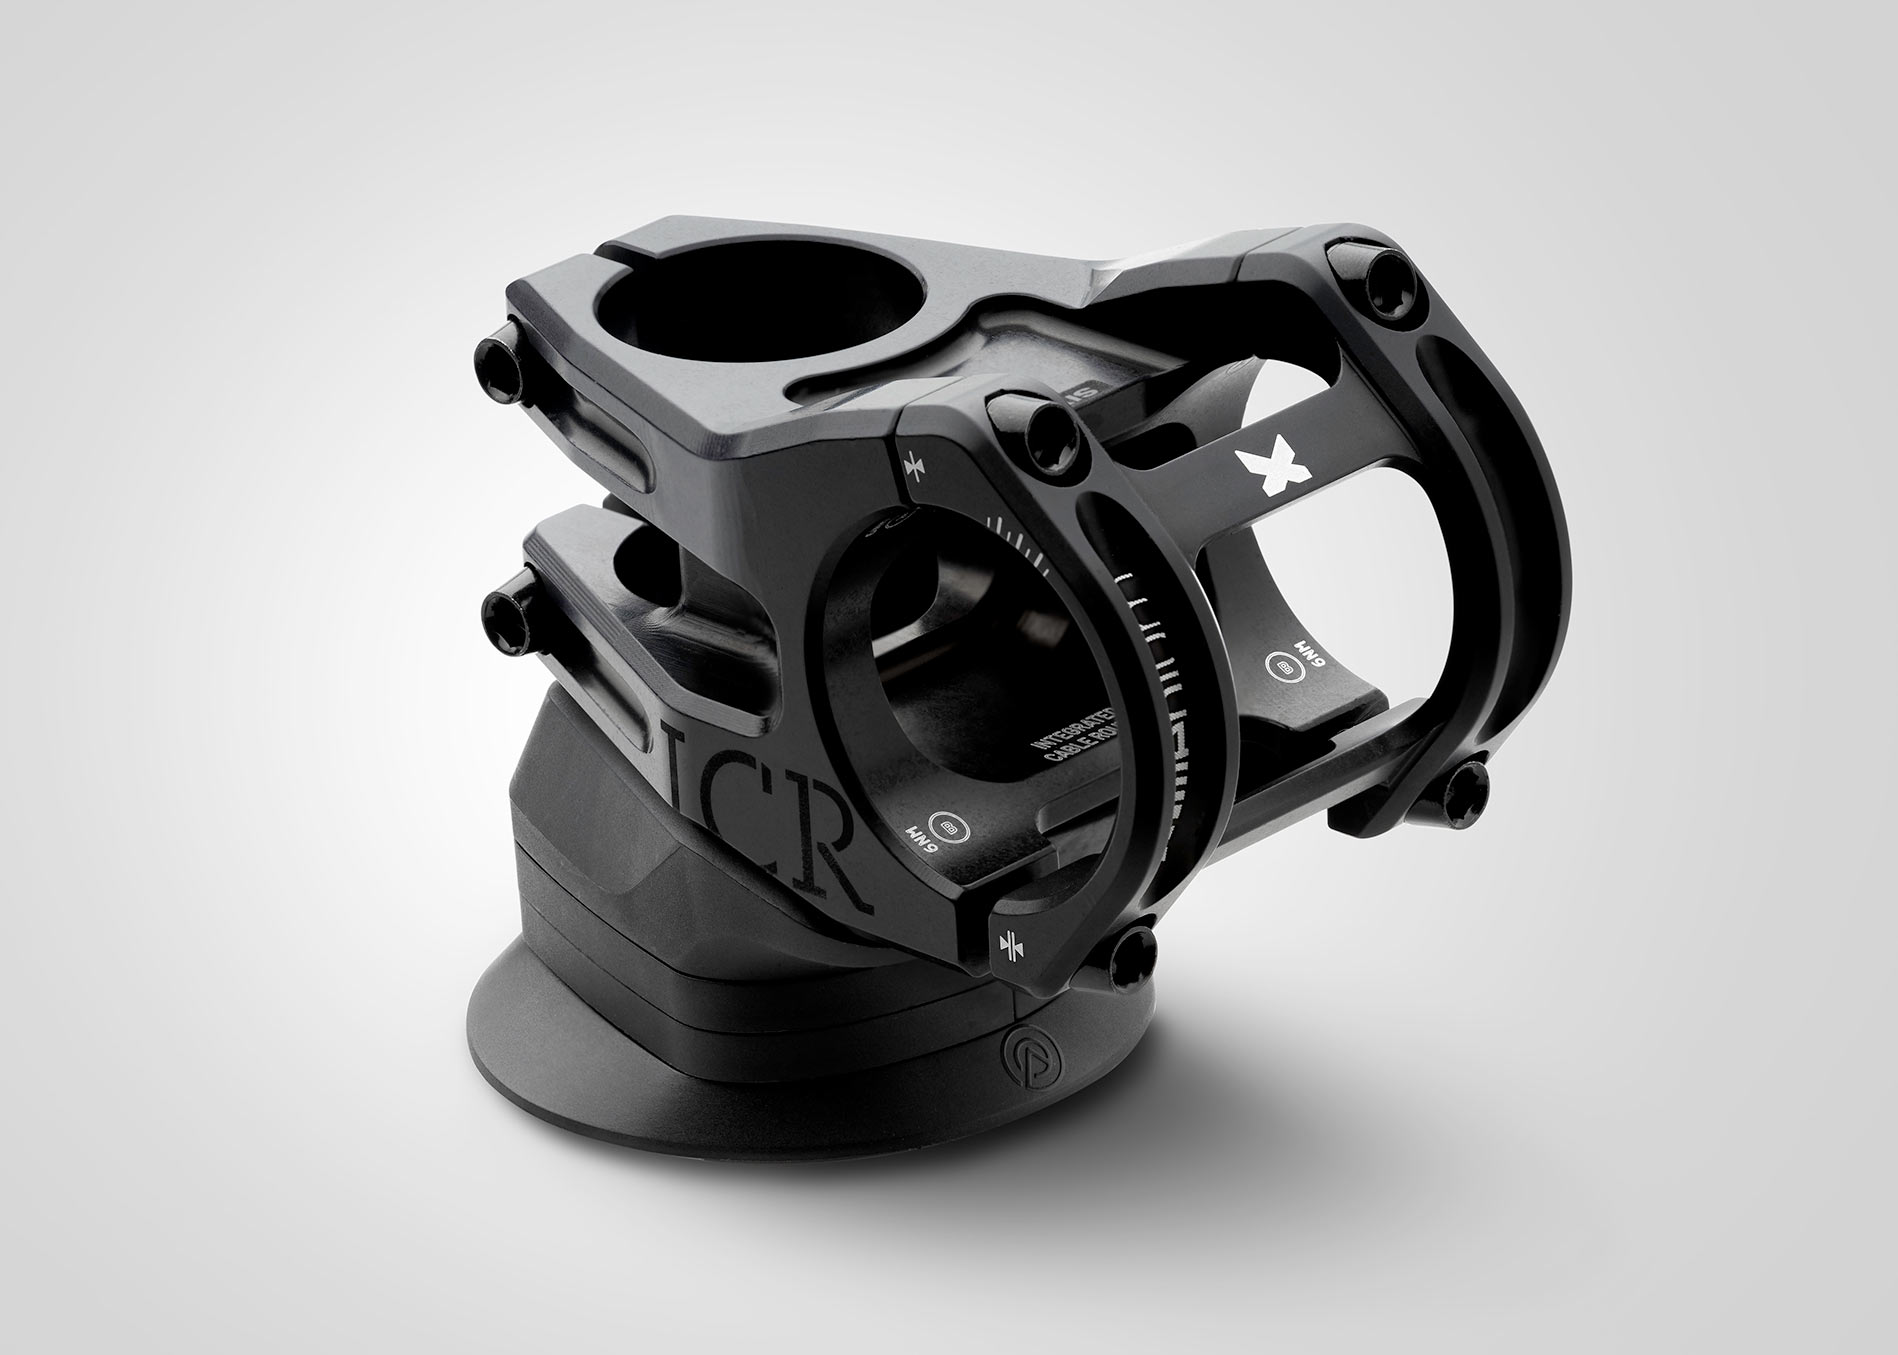 sixpack racing millennium ICR stem with internal hidden cable routing